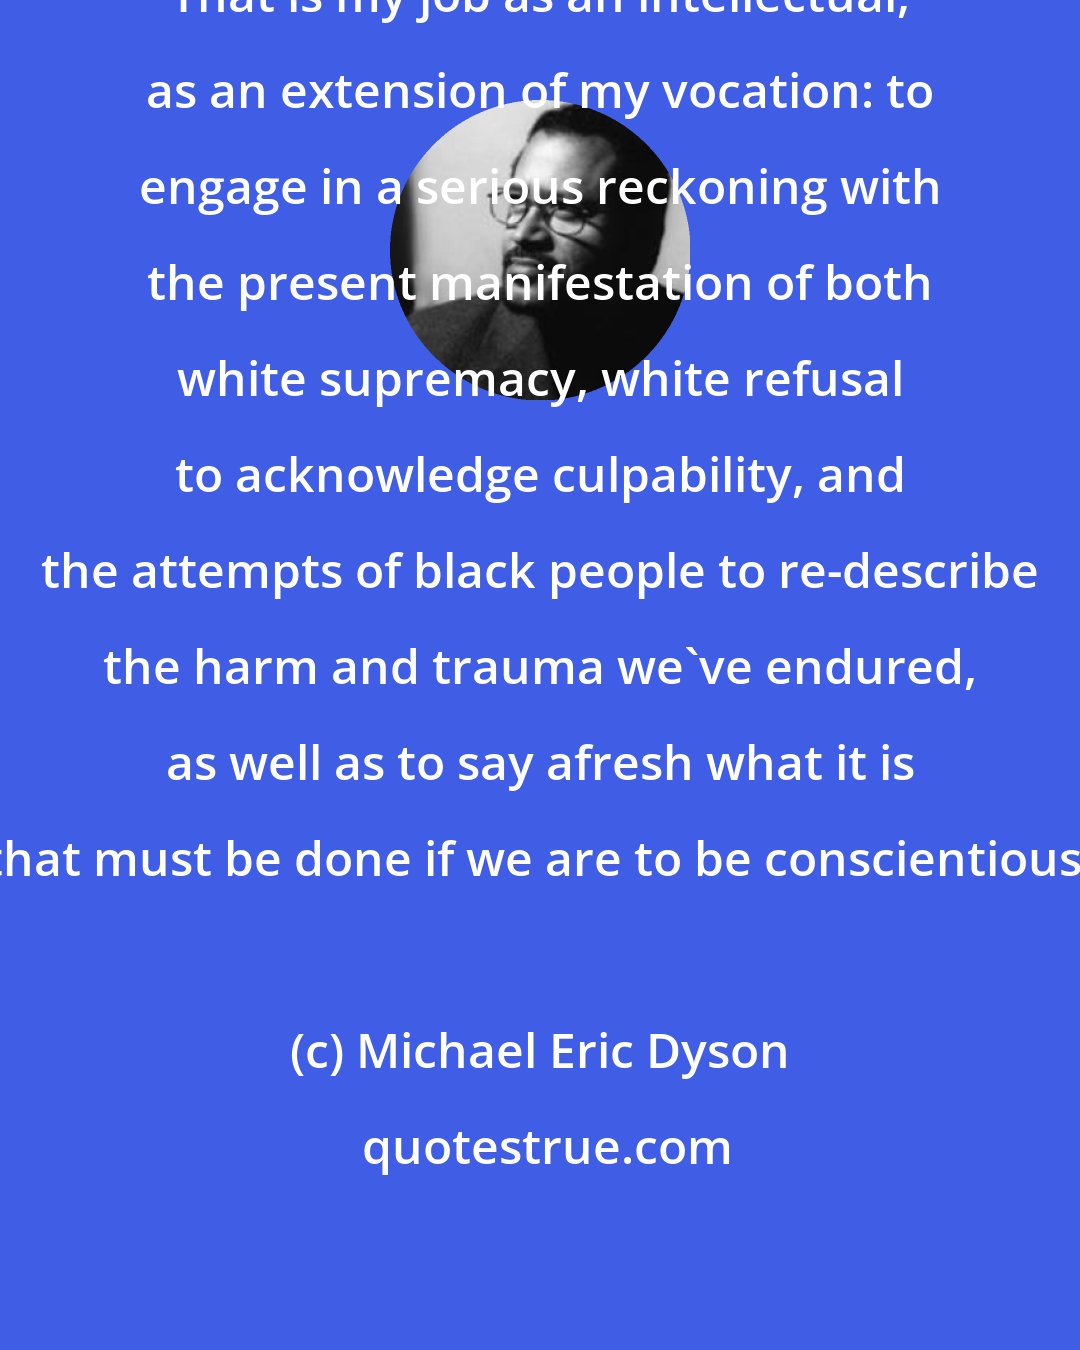 Michael Eric Dyson: That is my job as an intellectual, as an extension of my vocation: to engage in a serious reckoning with the present manifestation of both white supremacy, white refusal to acknowledge culpability, and the attempts of black people to re-describe the harm and trauma we've endured, as well as to say afresh what it is that must be done if we are to be conscientious.